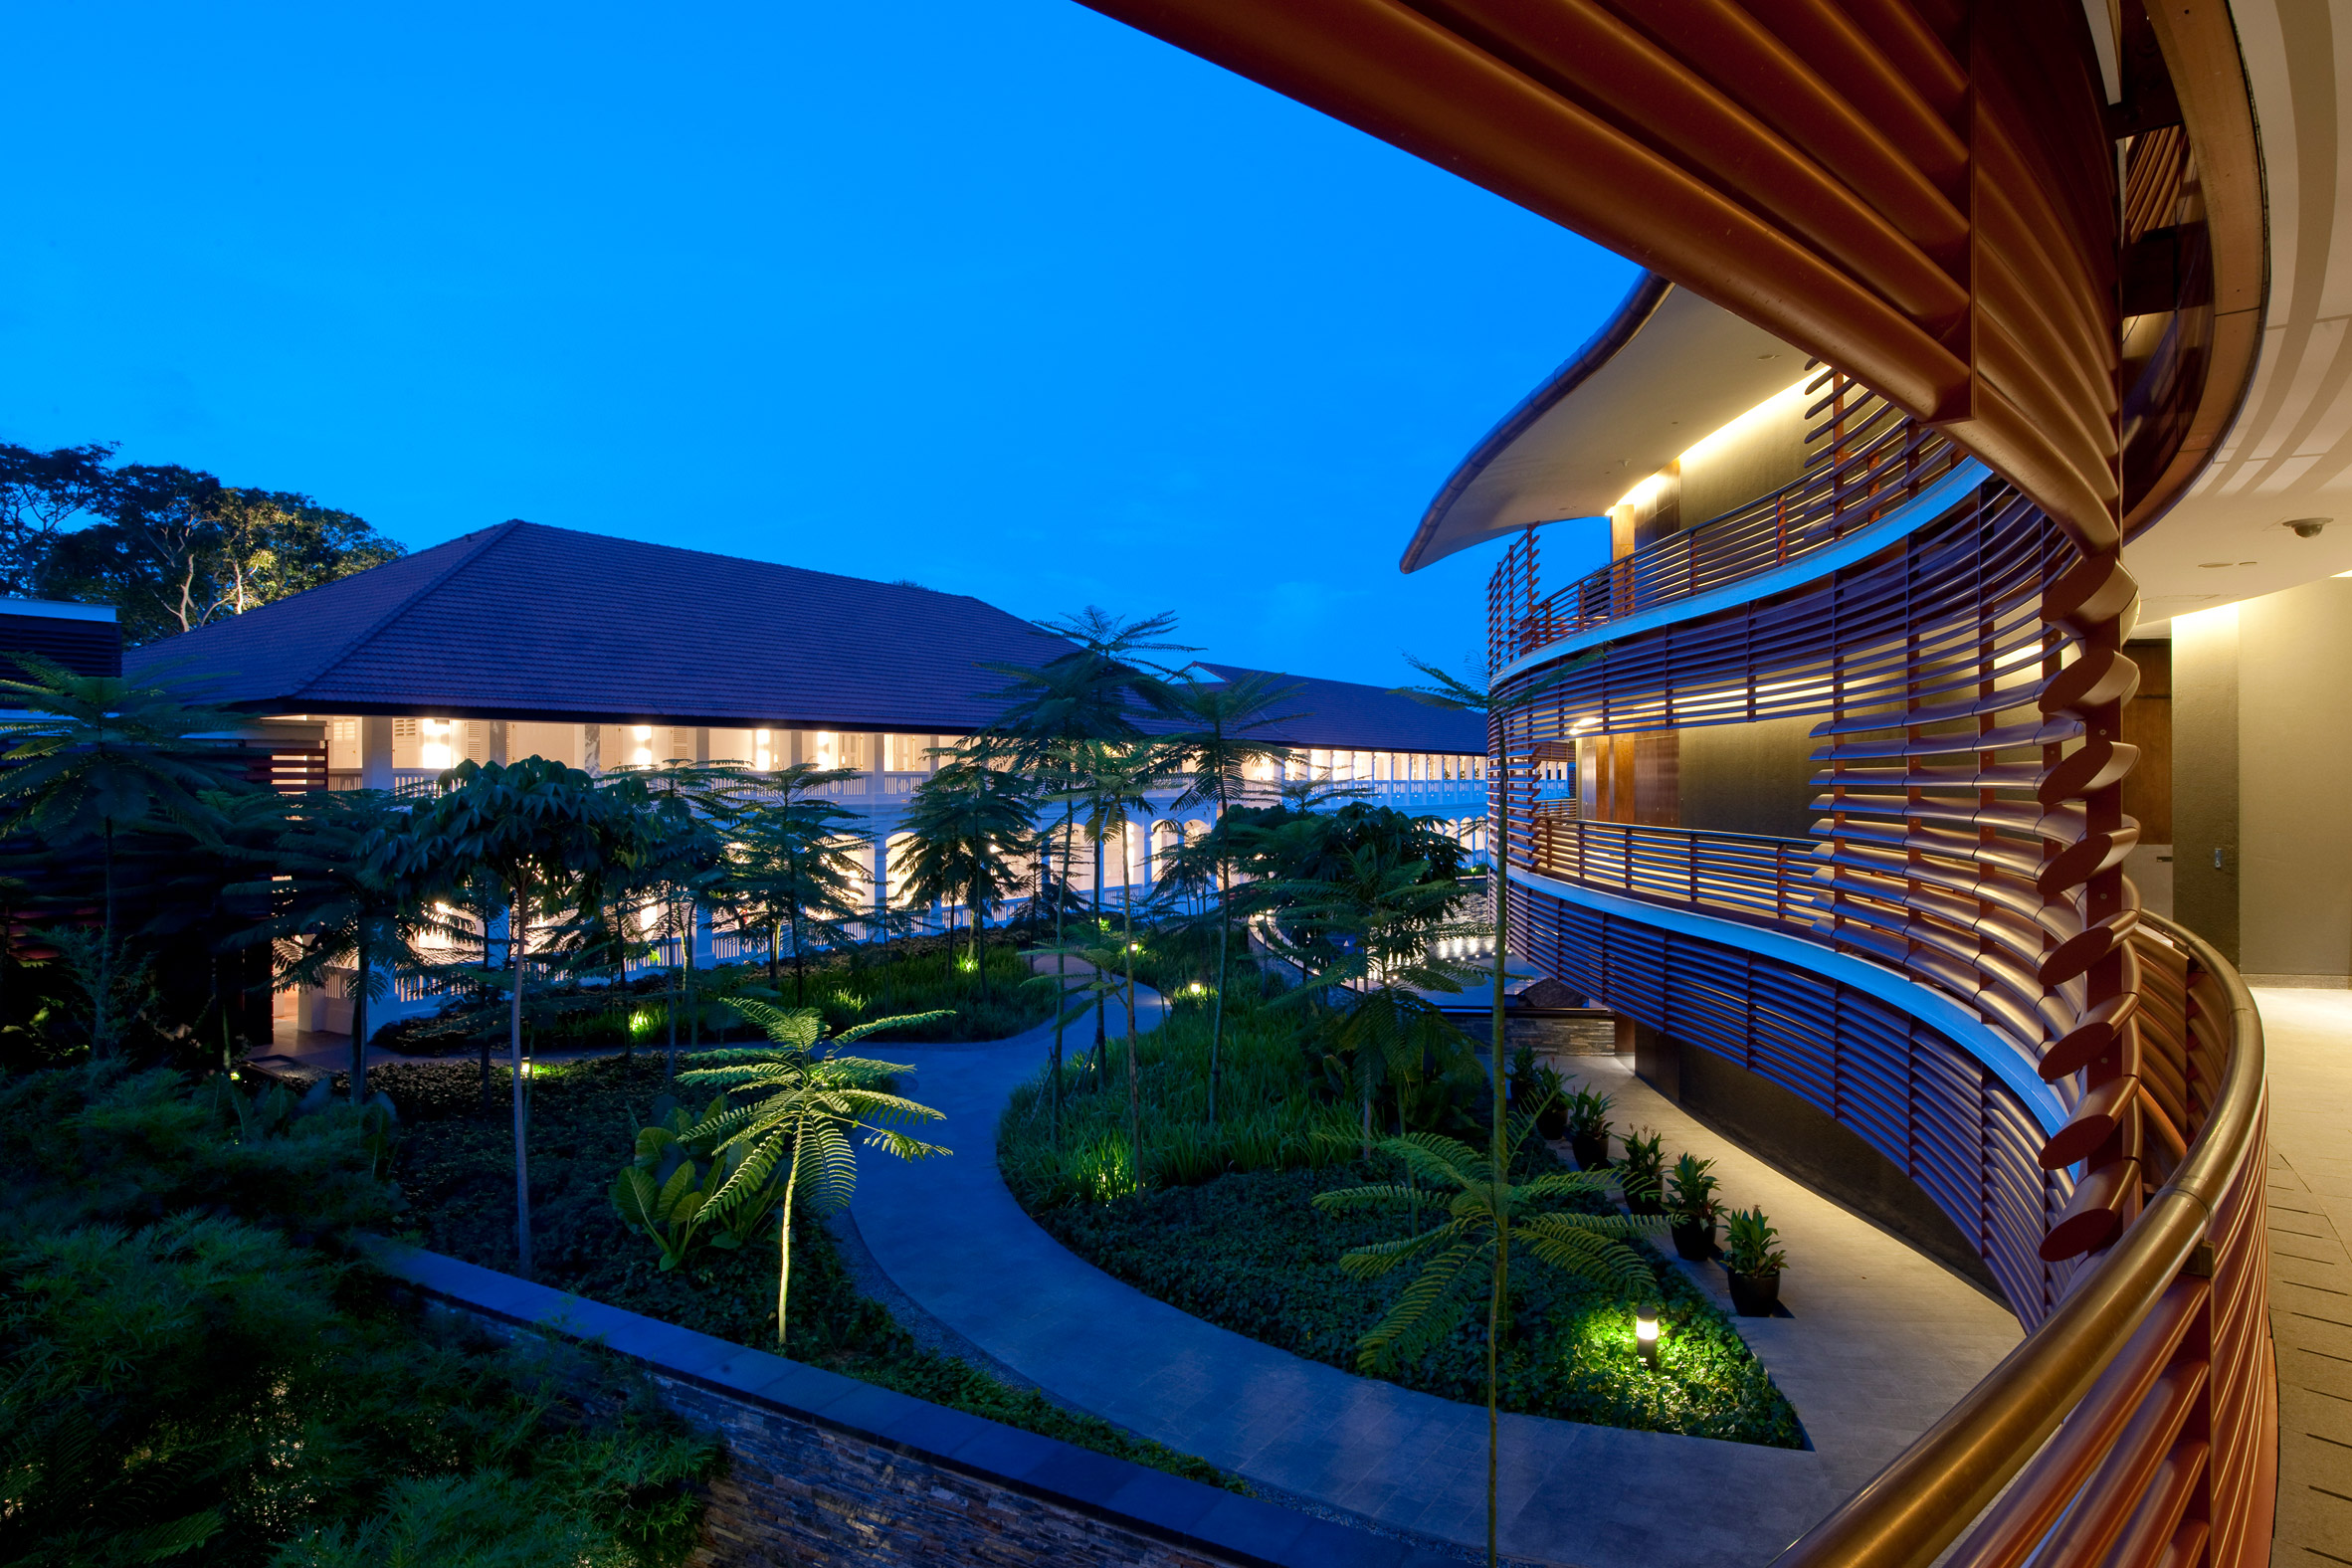 Capella Resort by Foster + Partners